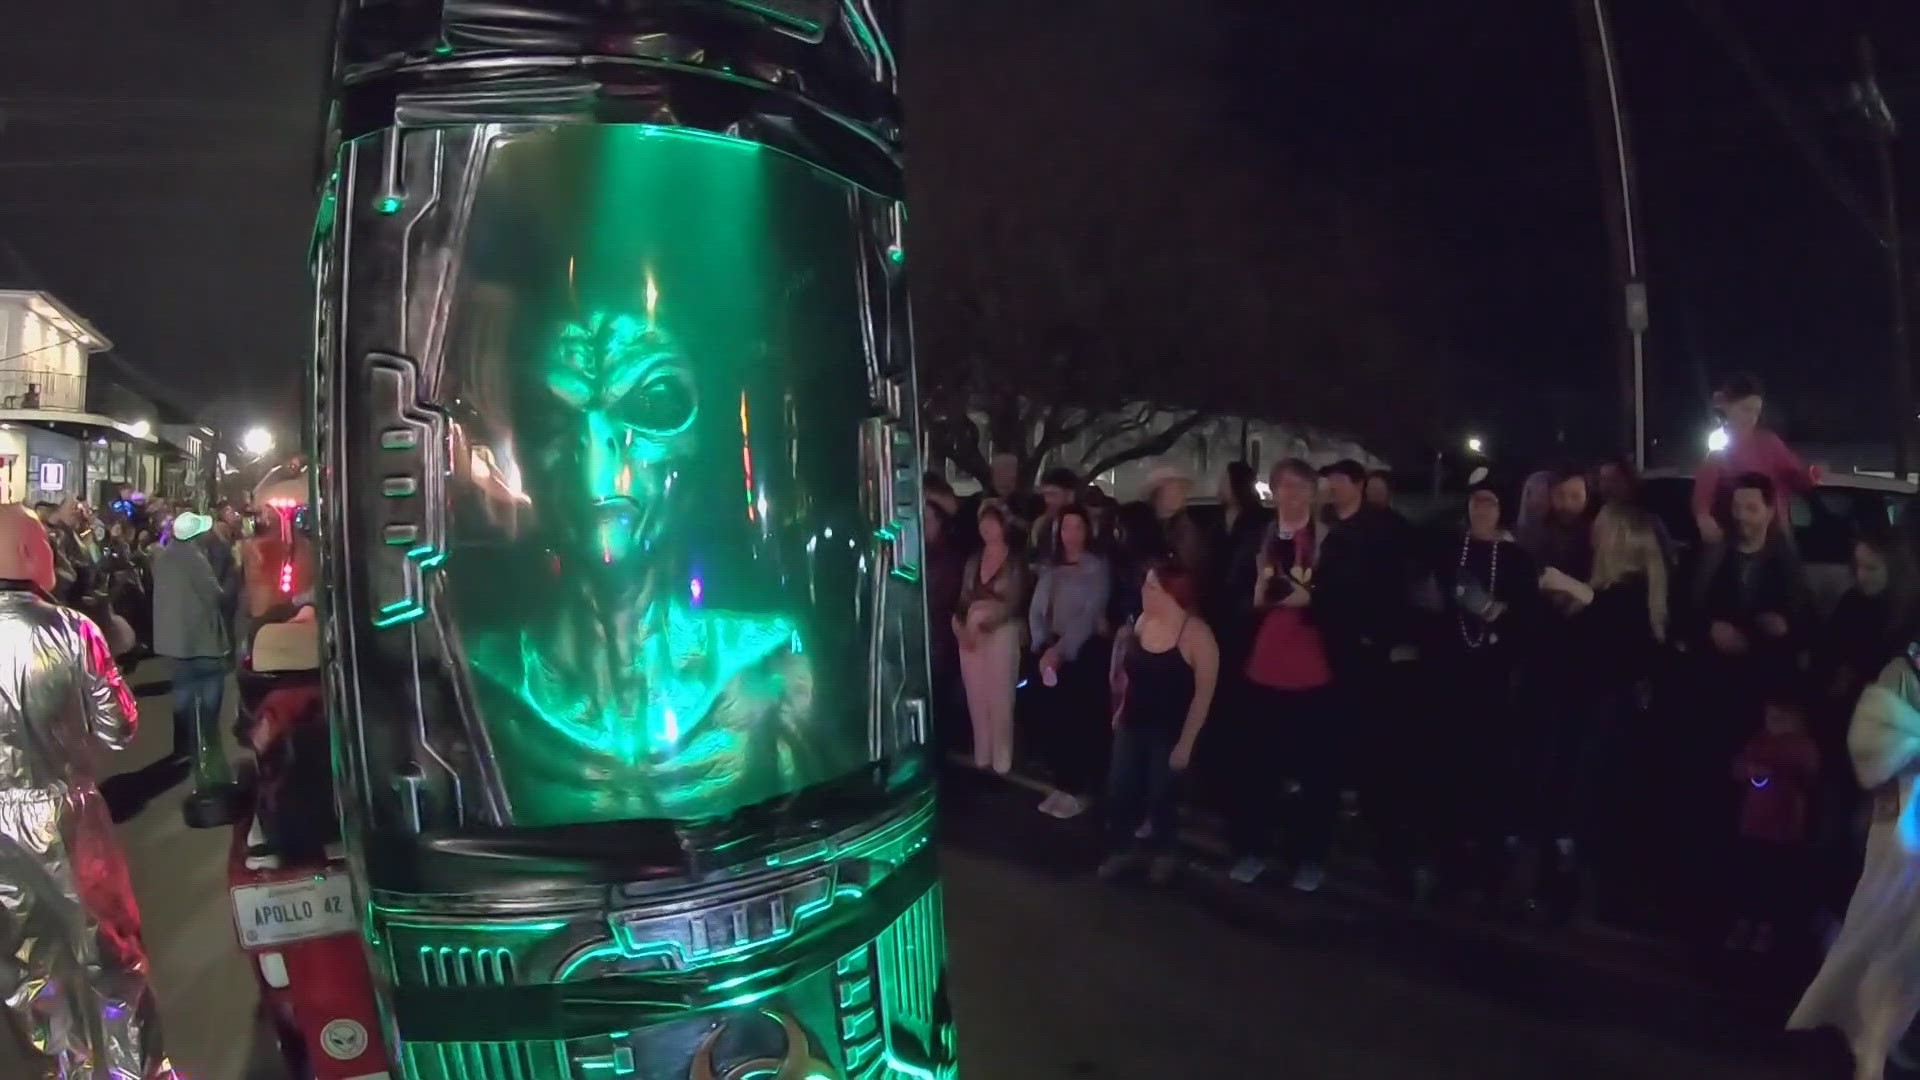 Cold snaps can force you to change Carnival plans, but on Saturday thousands will be partying under the stars as the Krewe of Chewbacchus holds its parade.